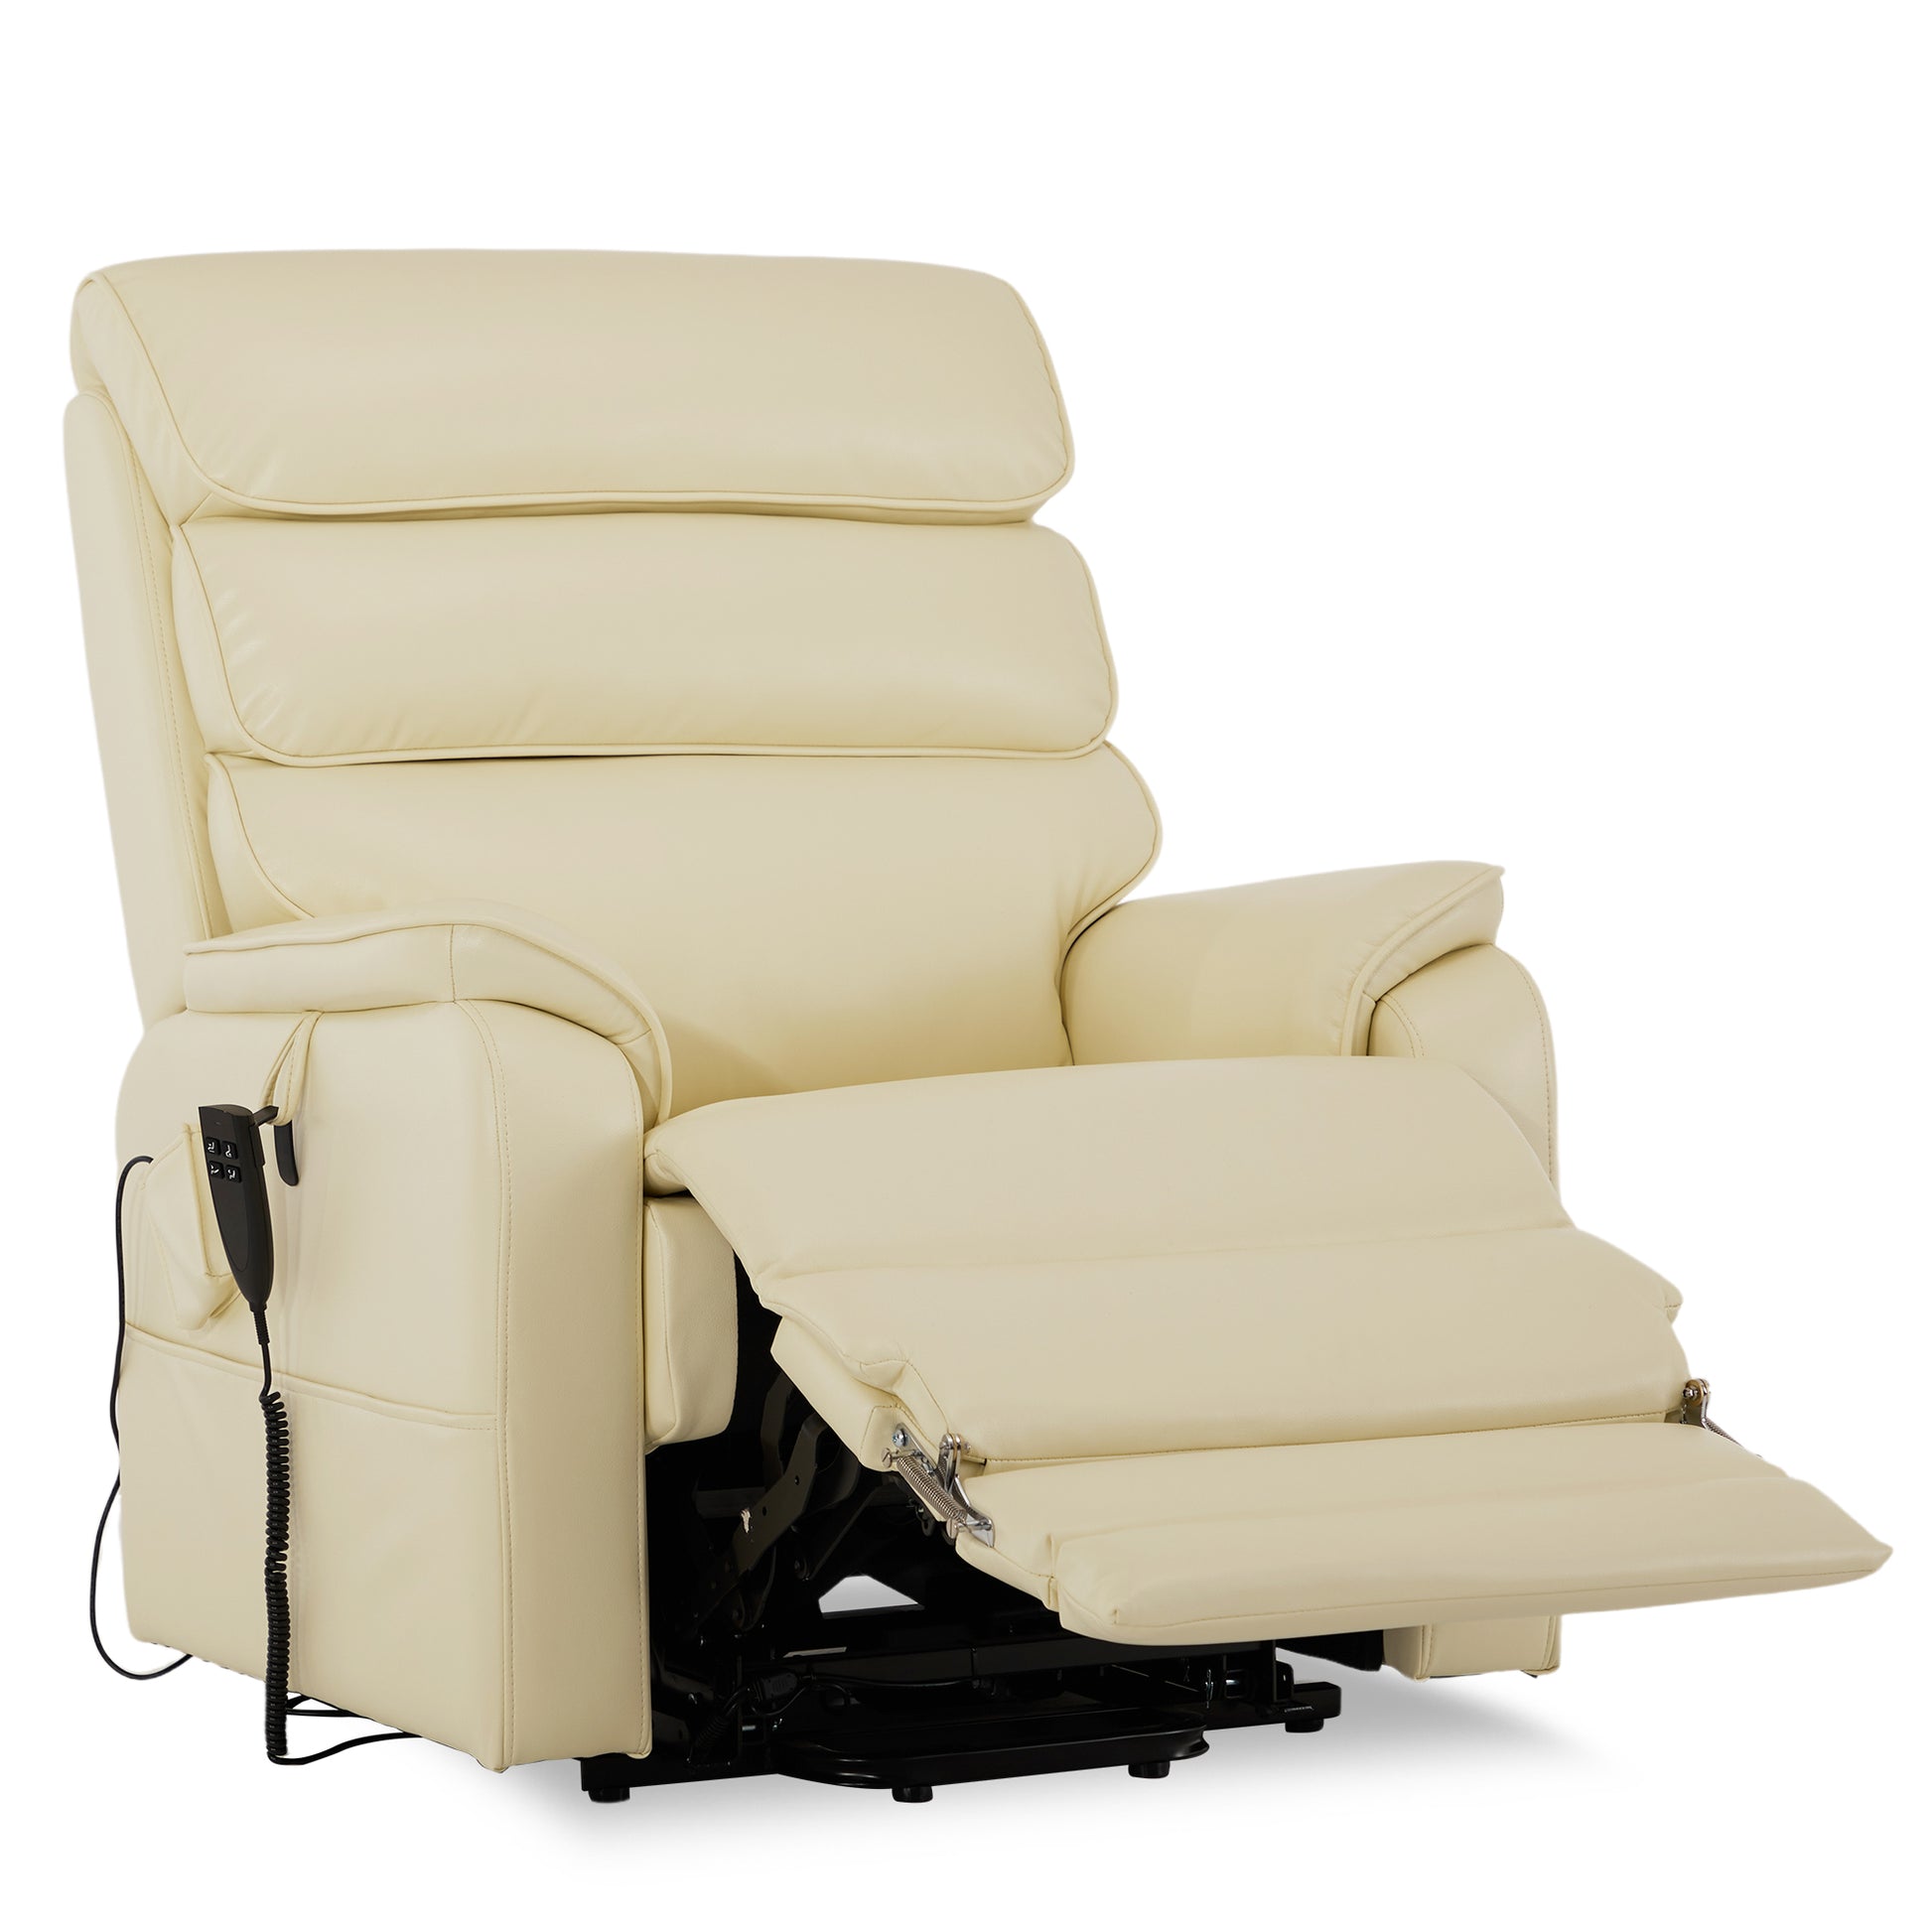 Big Man Recliner Lift Chair With Heat&Massage And Infinite Postions